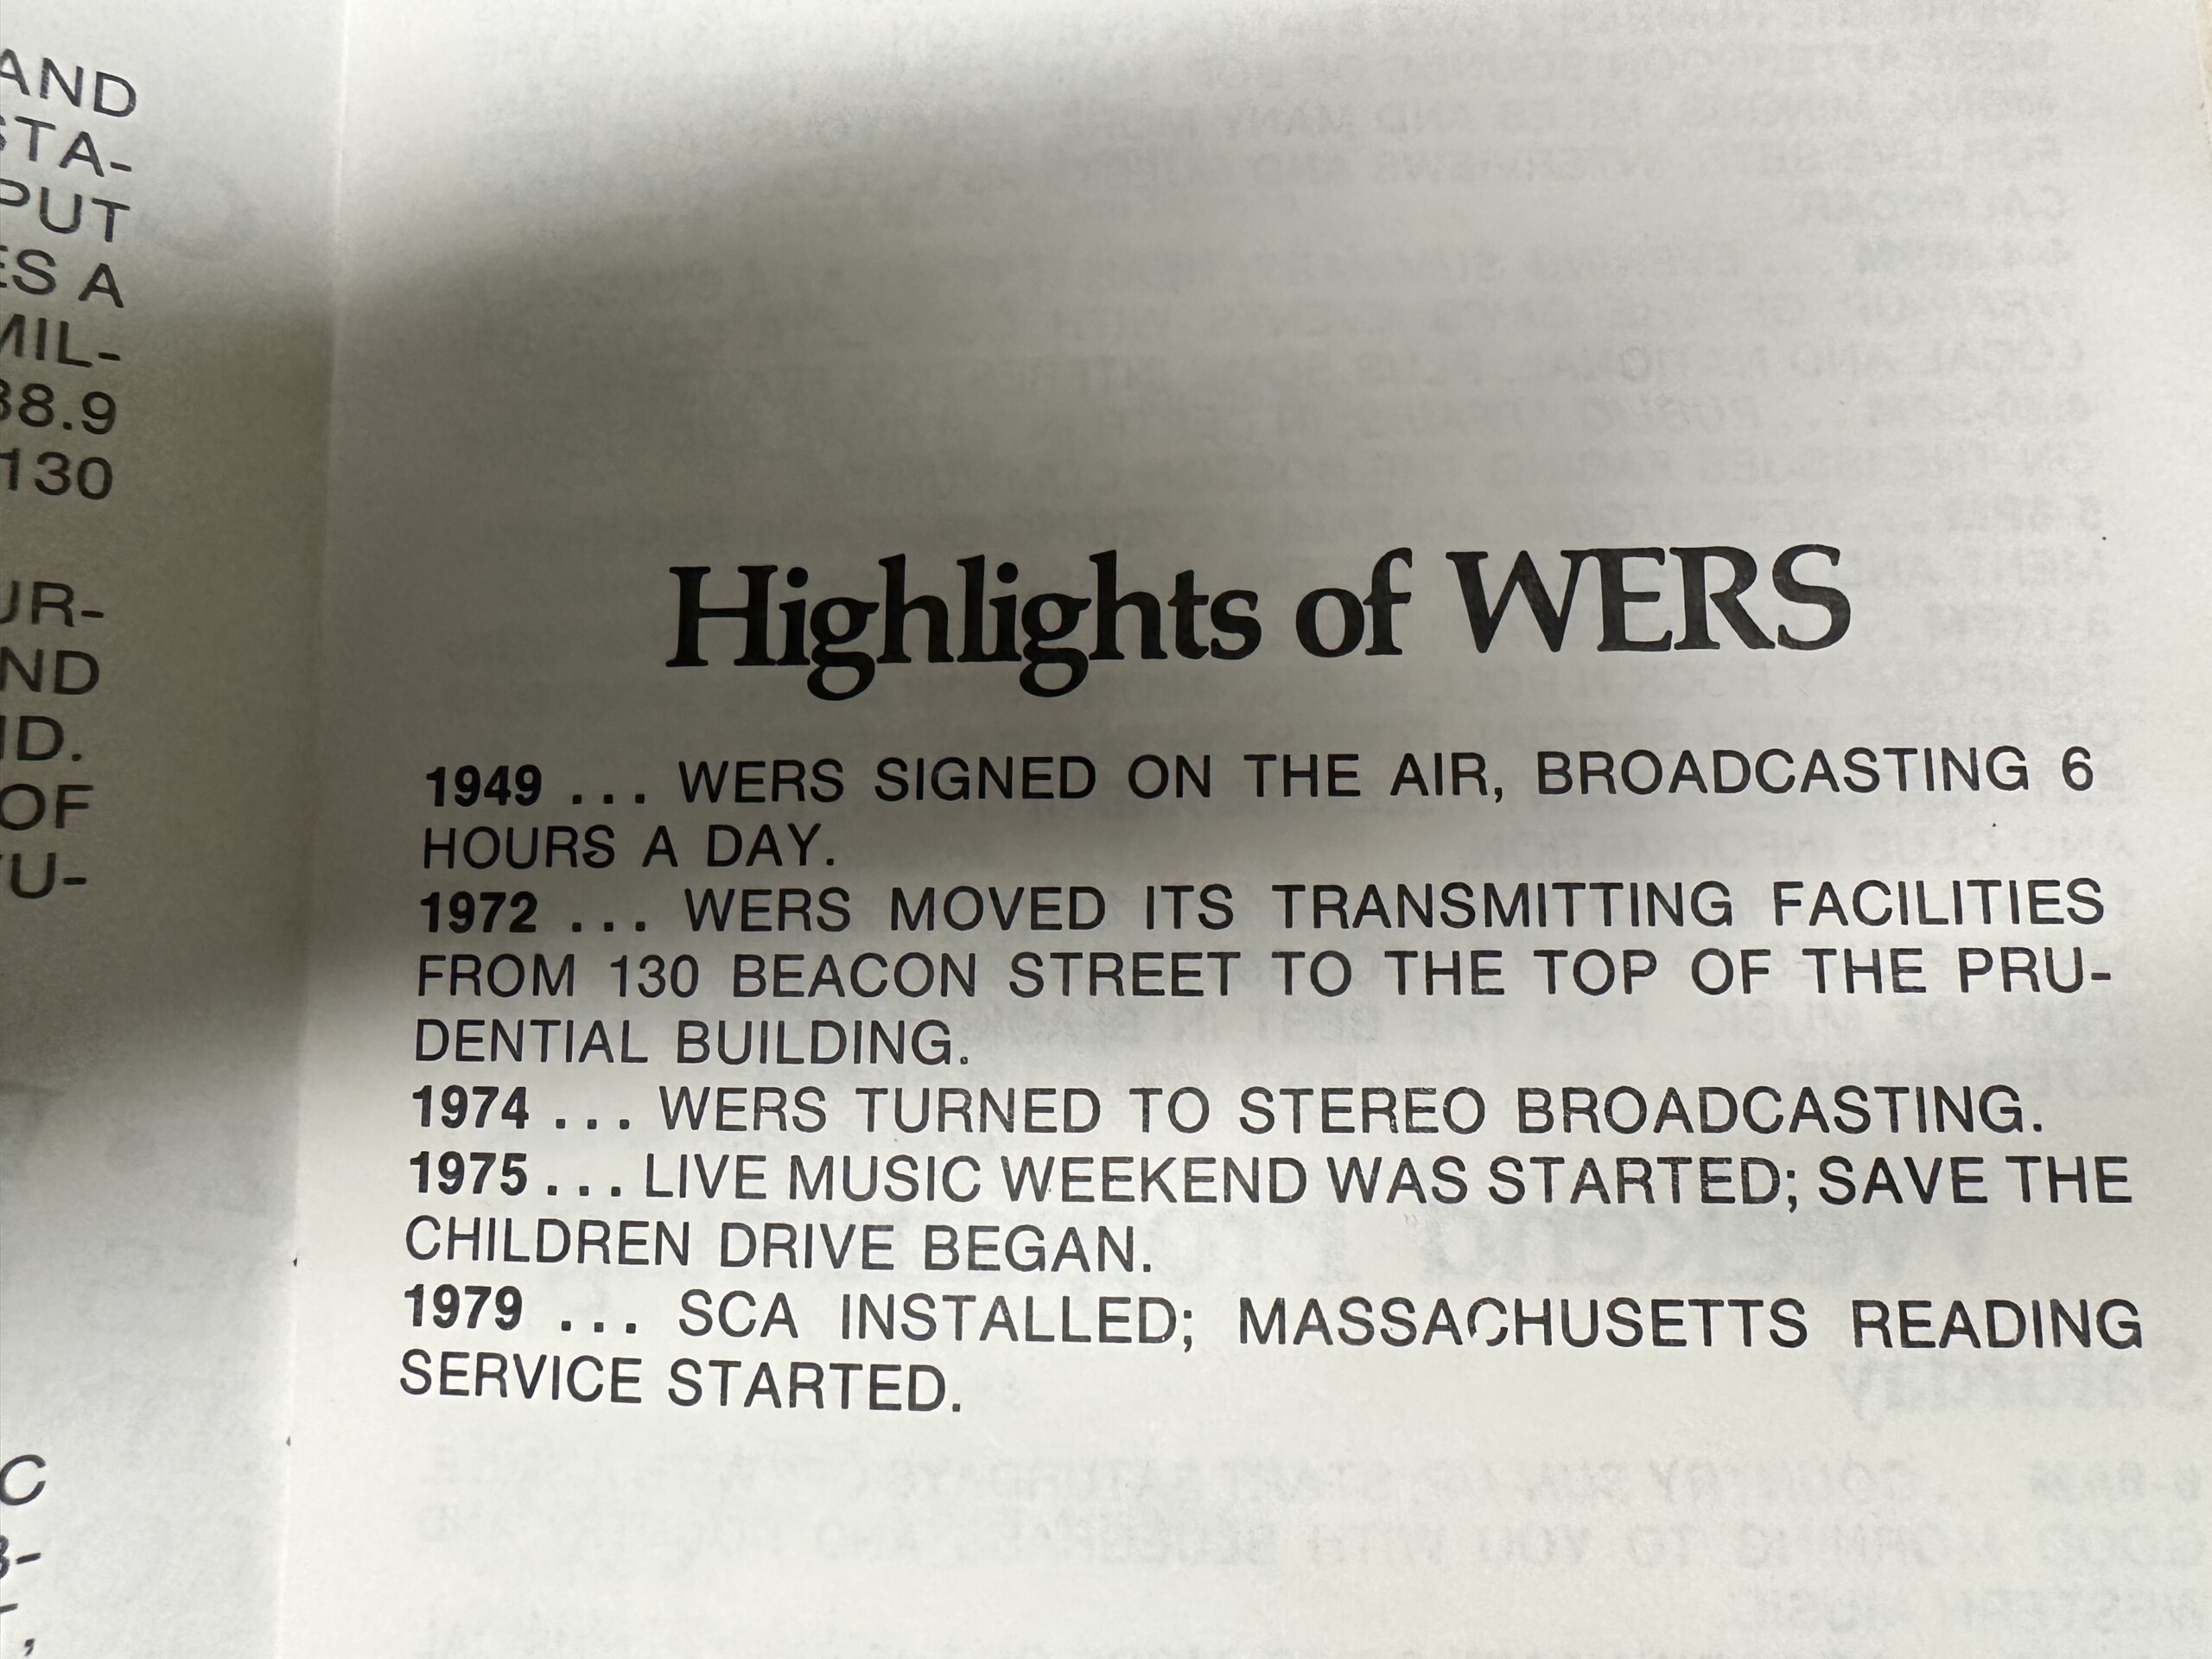 A brief written history of WERS published in 1979.